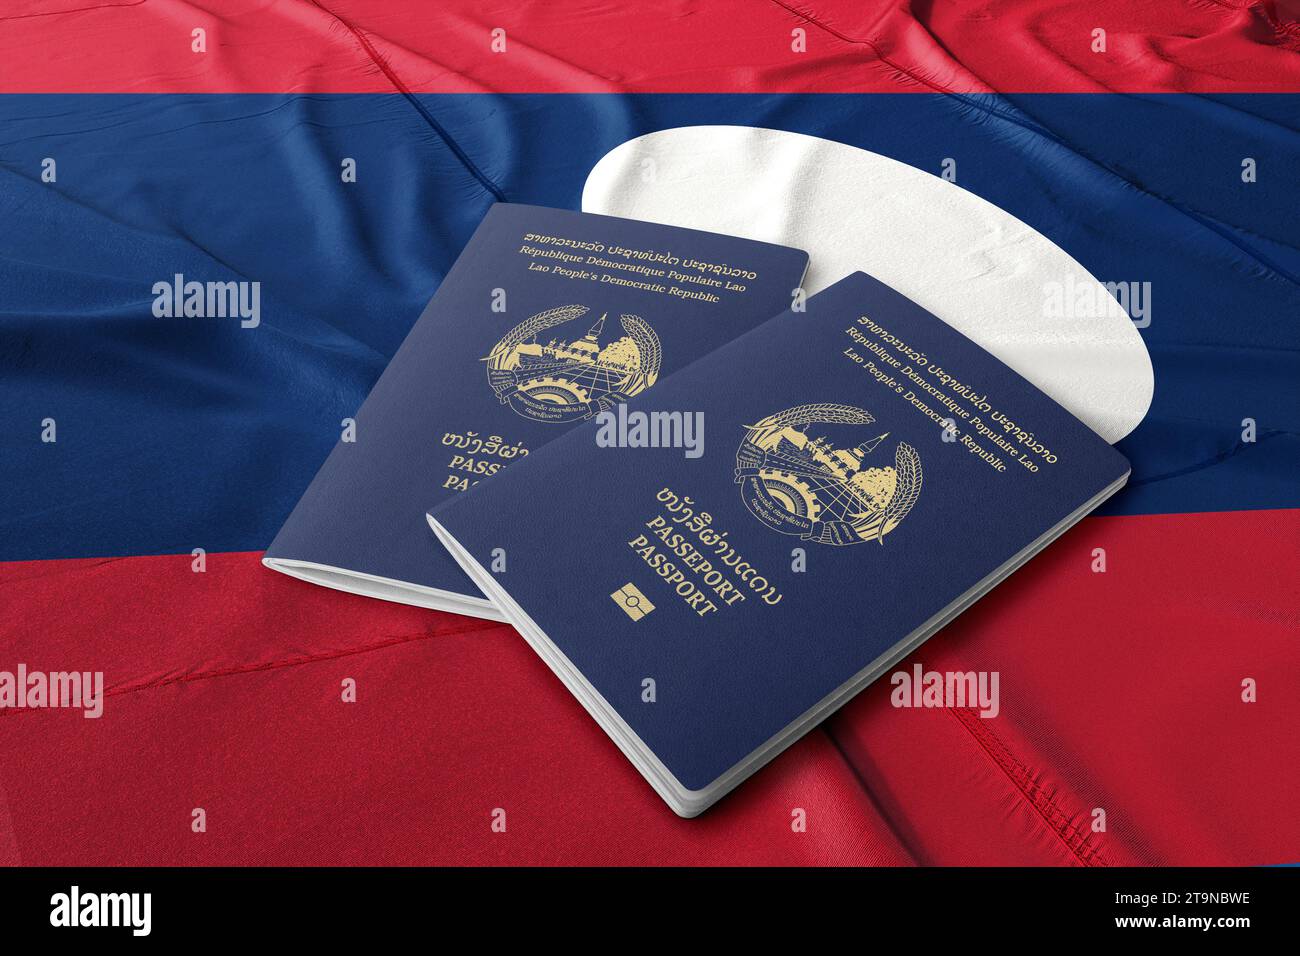 Laotian passports are issued to citizens of Laos by Consular Department within the Ministry of Foreign Affairs to travel internationally. Stock Photo